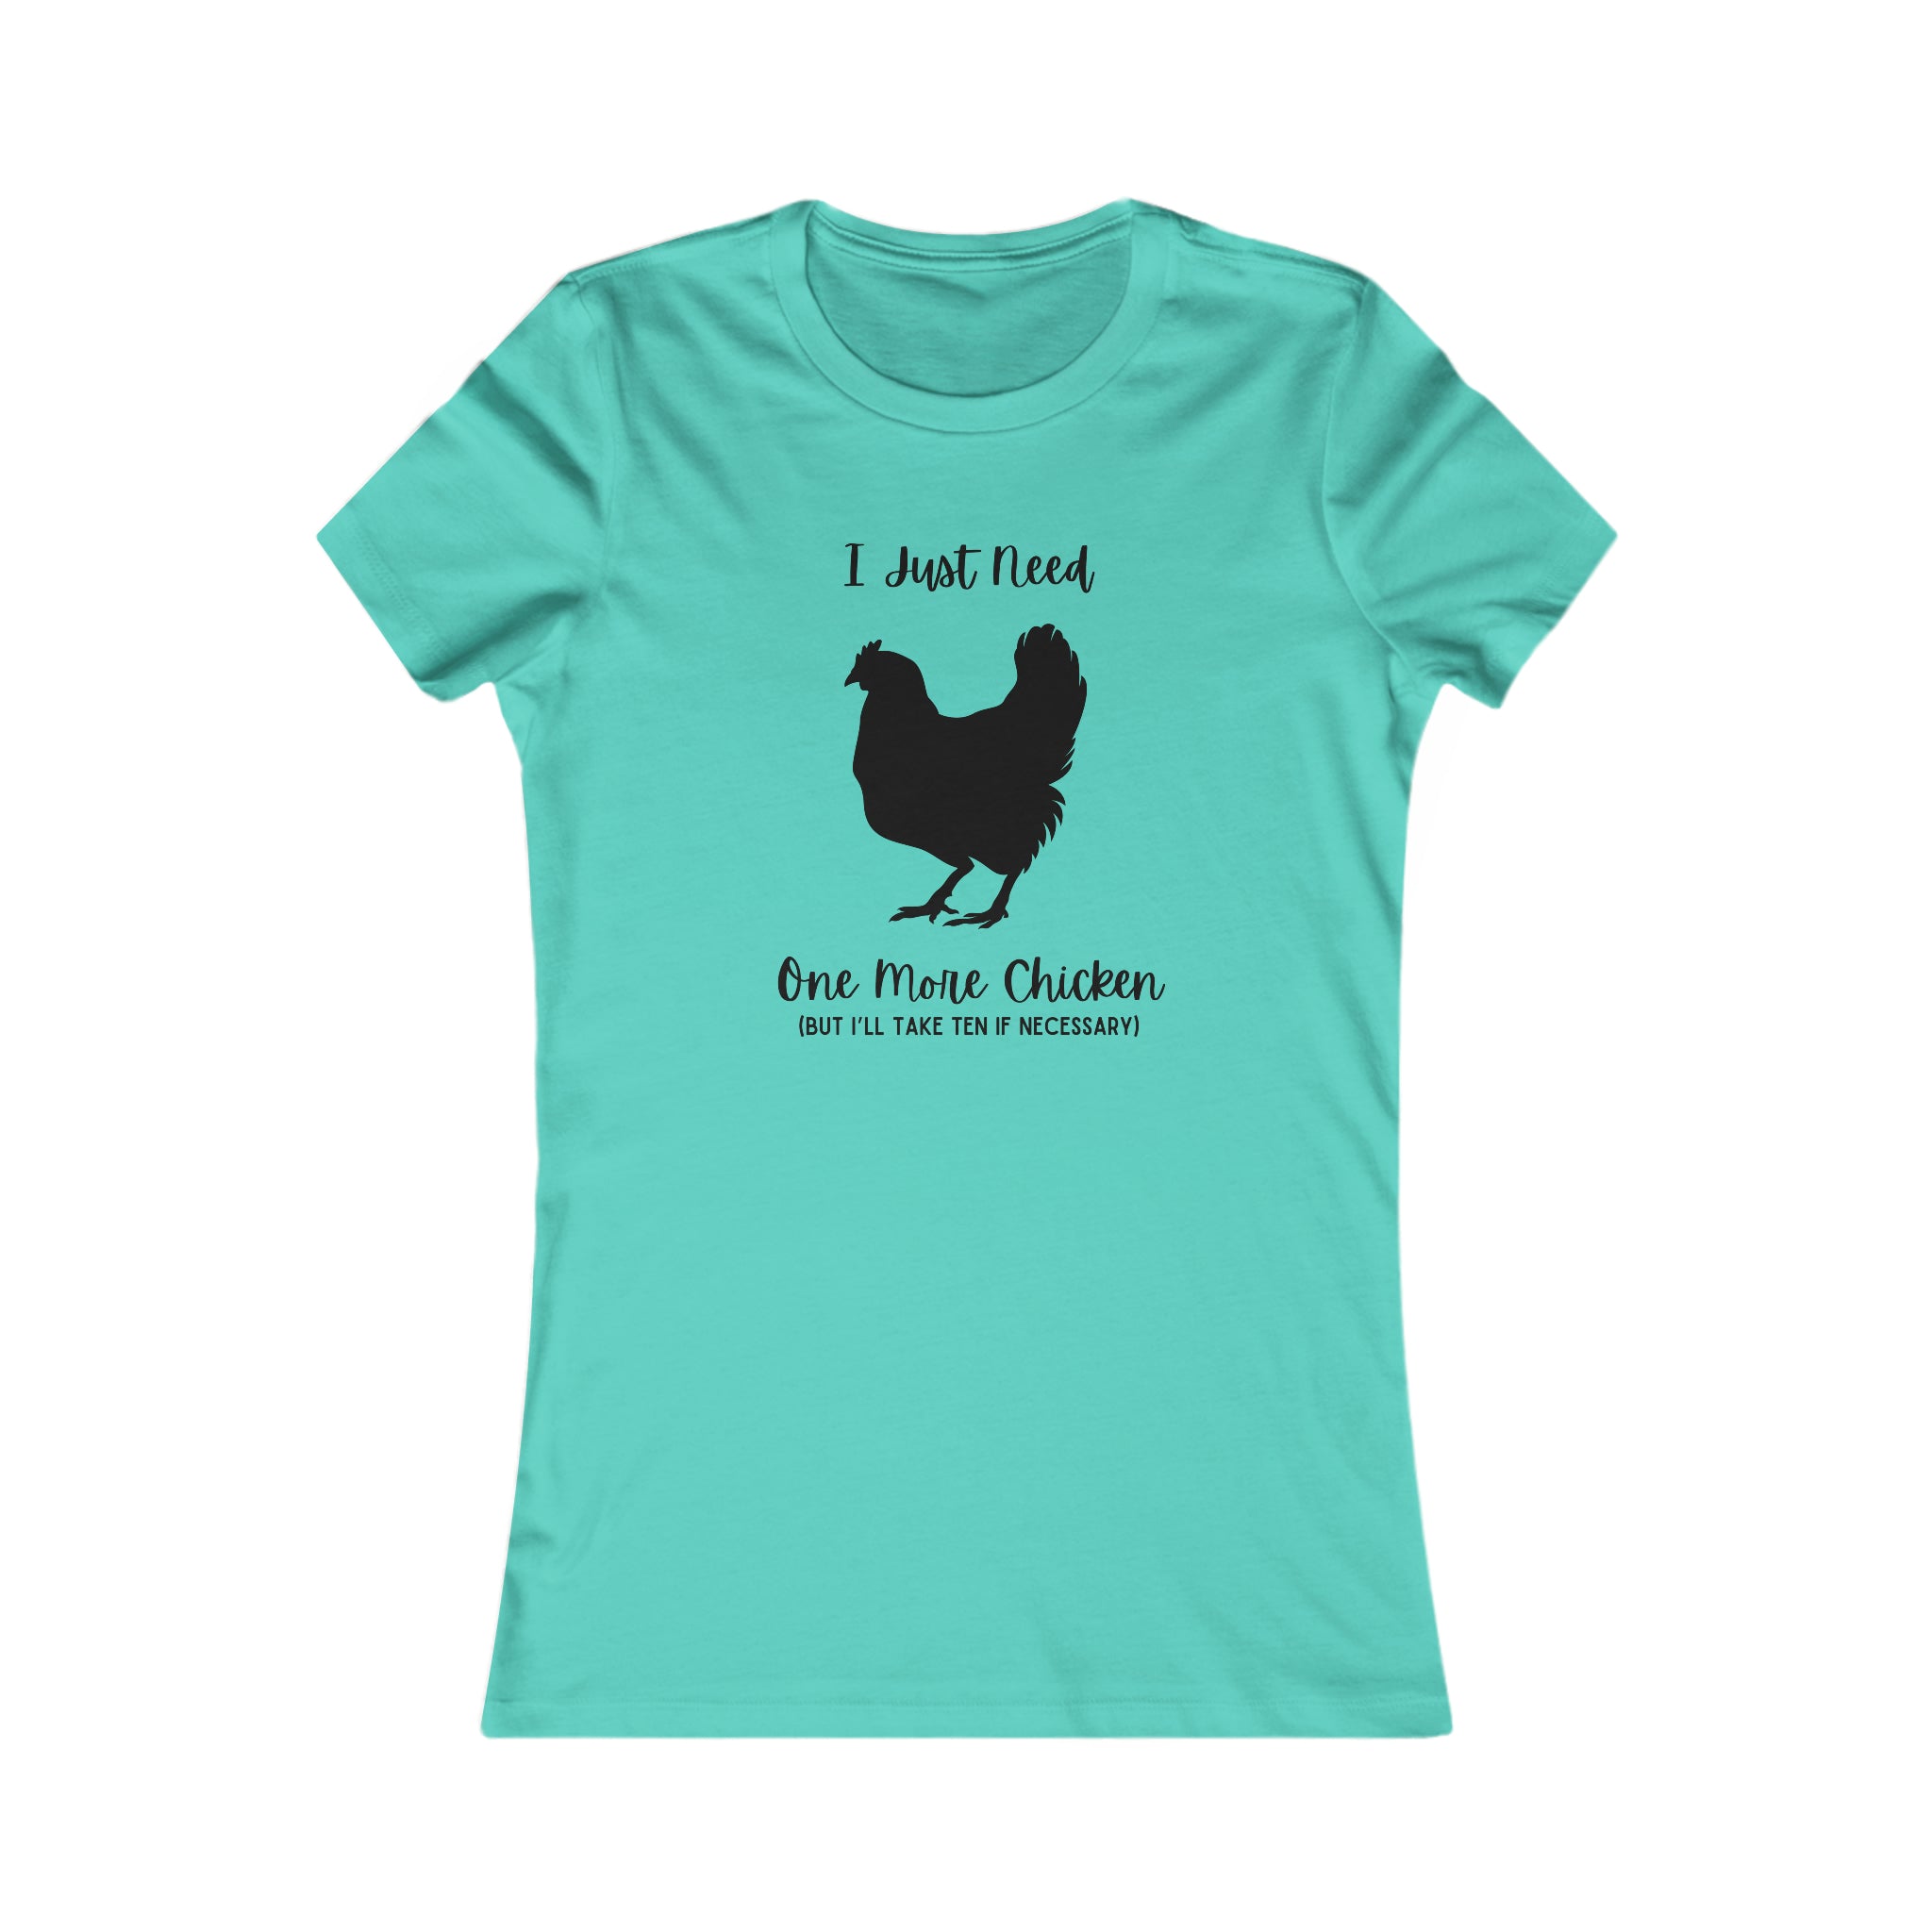 Green shirt with a chicken silhouette and phrase I just need one more chicken but I'll take ten if necessary